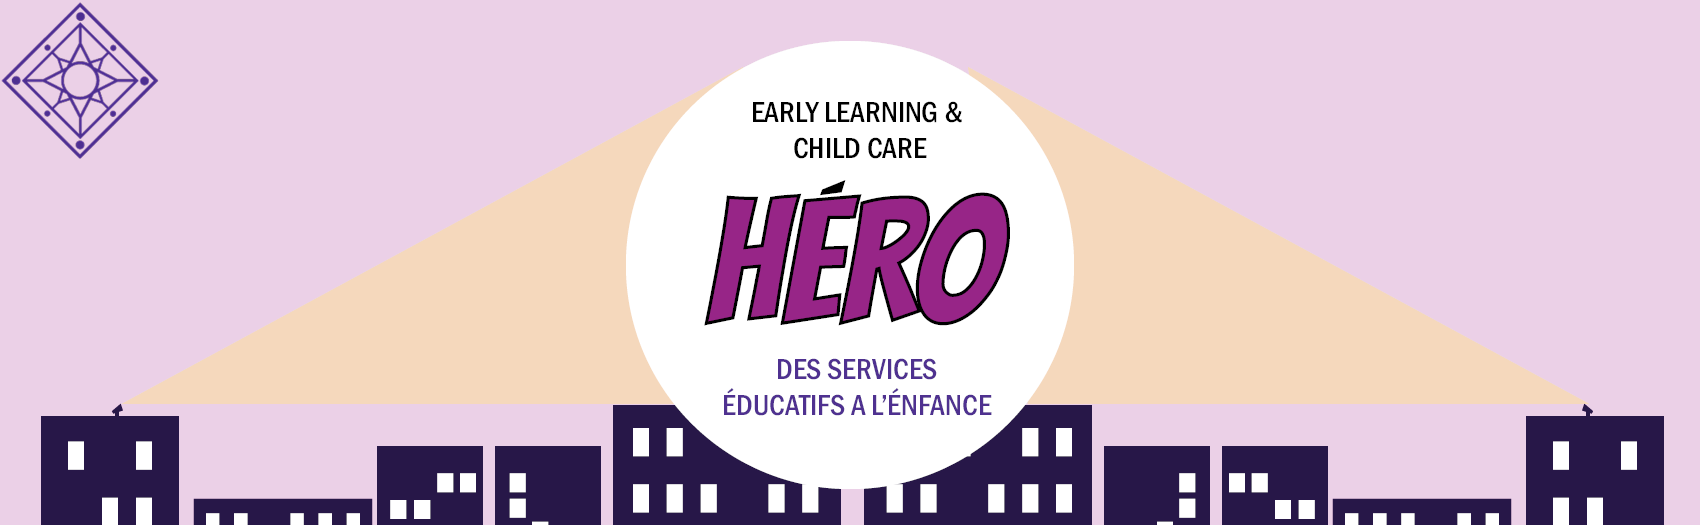 Early Learning & Child Care Hero / Héro des services éducatifs a l'énfance. Child Care Worker & Early Childhood Educator Appreciation Day, October 21, 2021